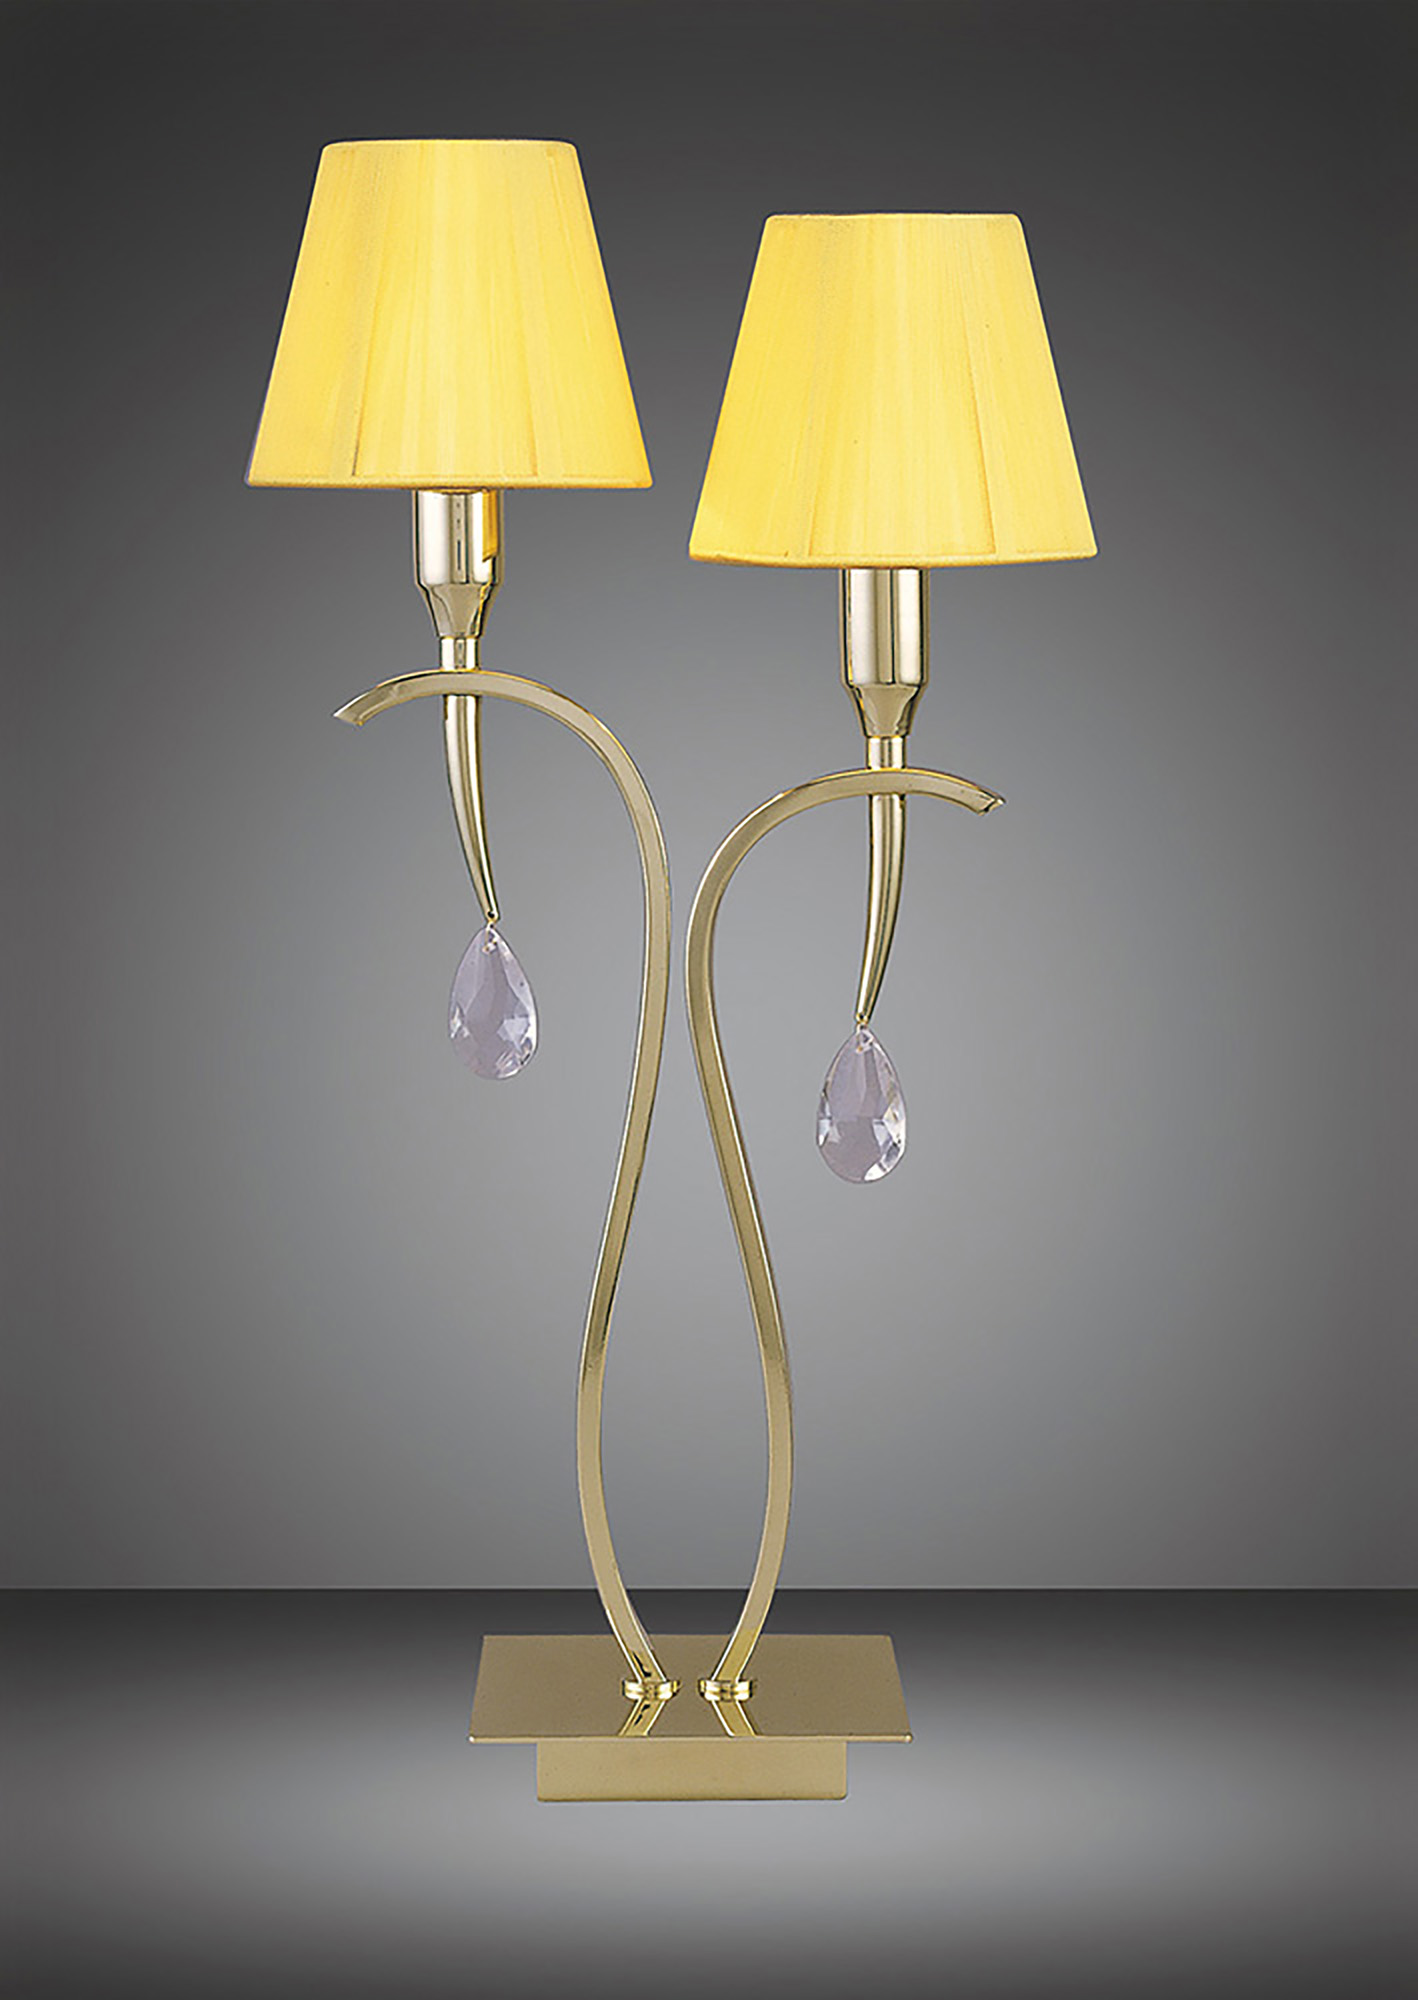 Siena PB Crystal Table Lamps Mantra Traditional Crystal Table Lamps